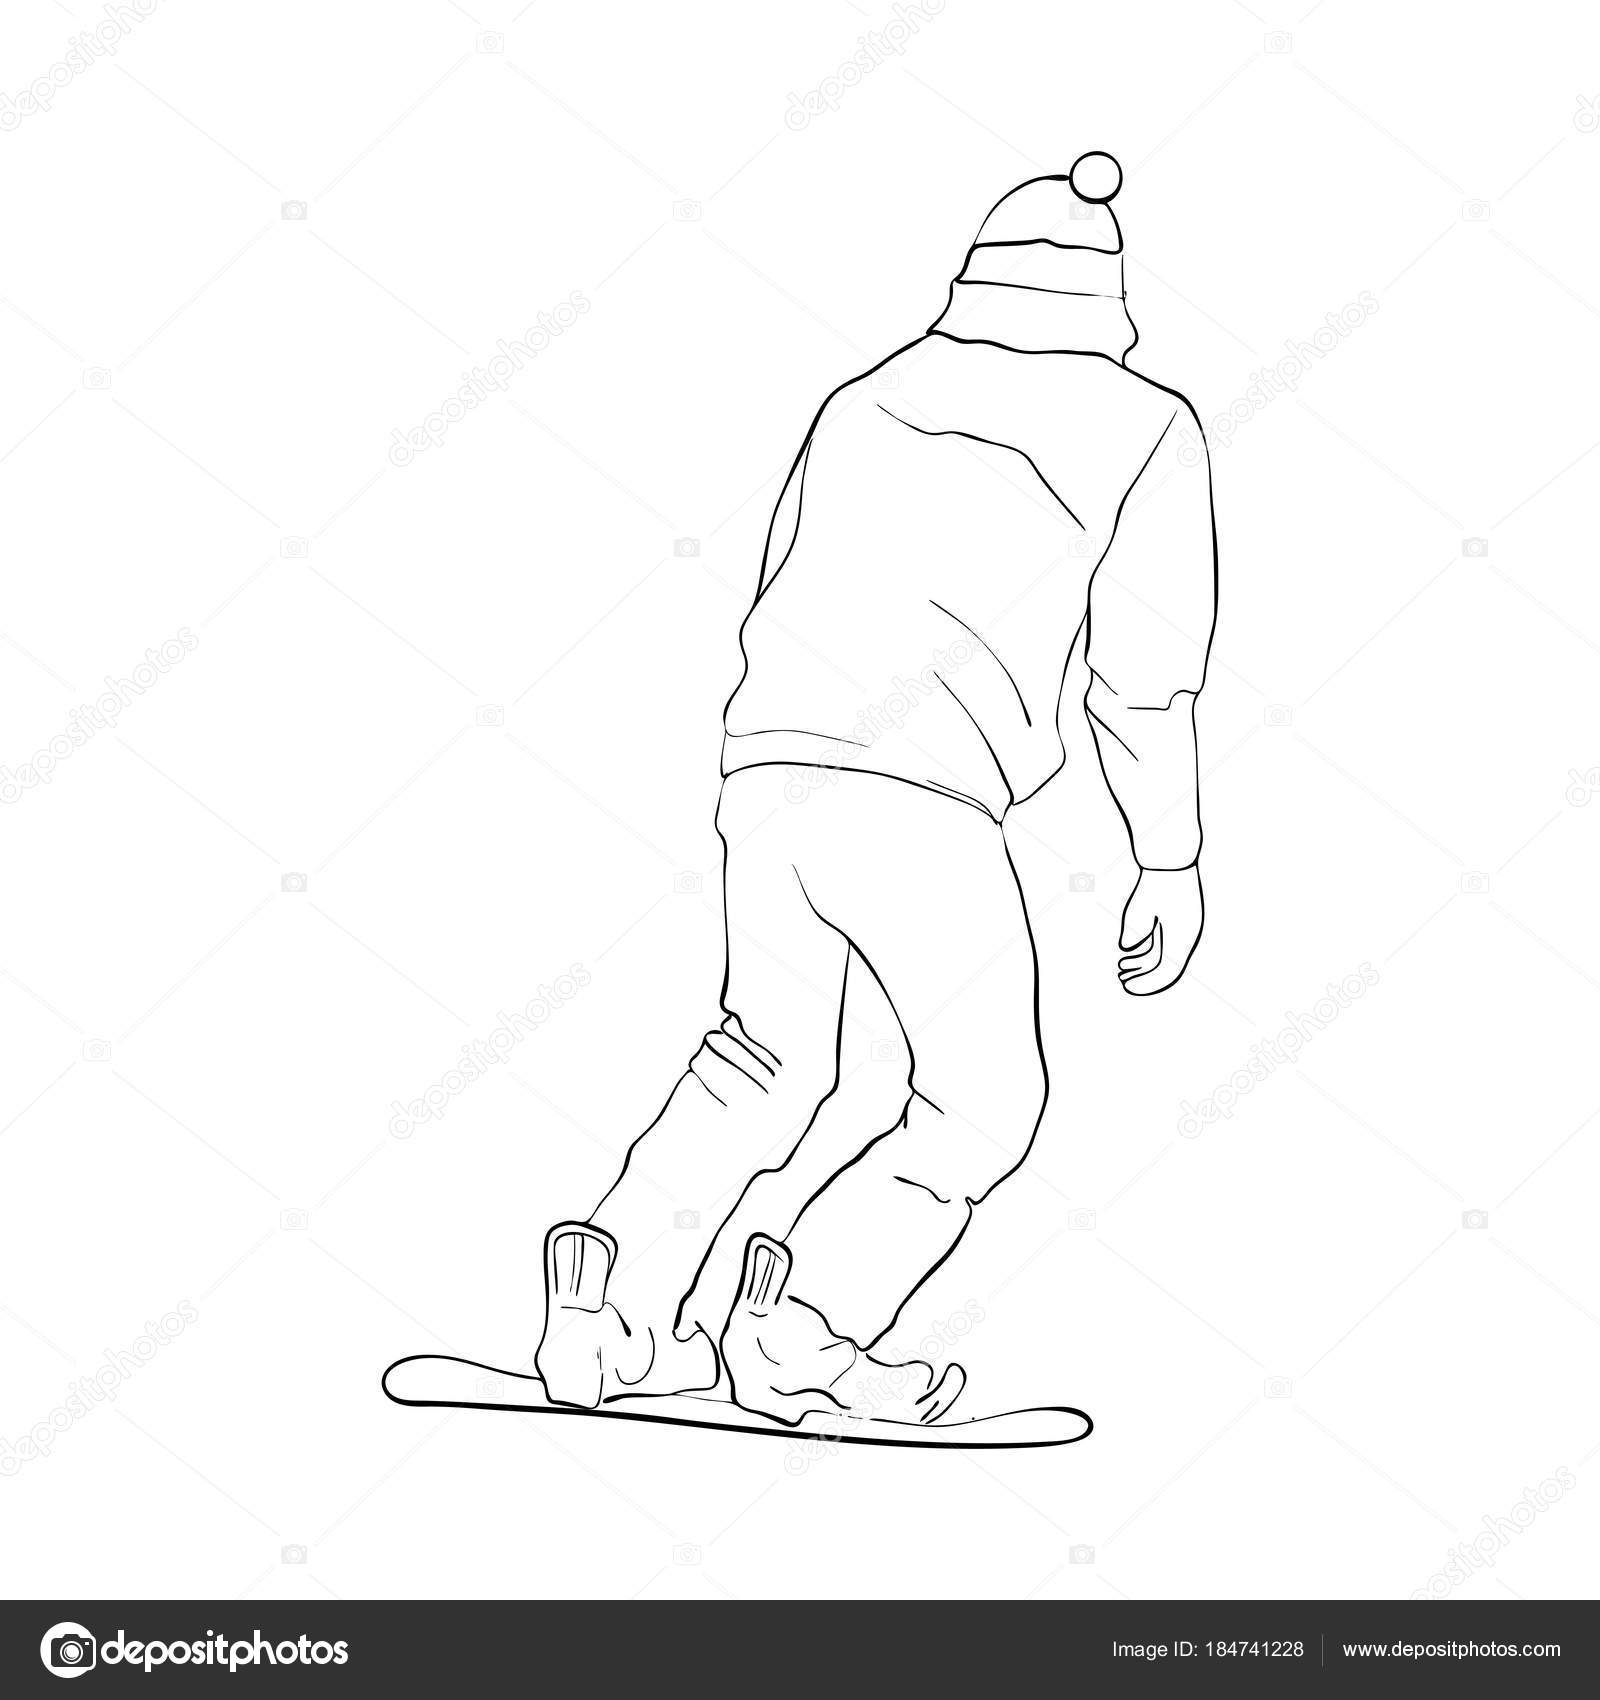 vector drawing snowboarder — Stock Vector © cat_arch_angel #184741228